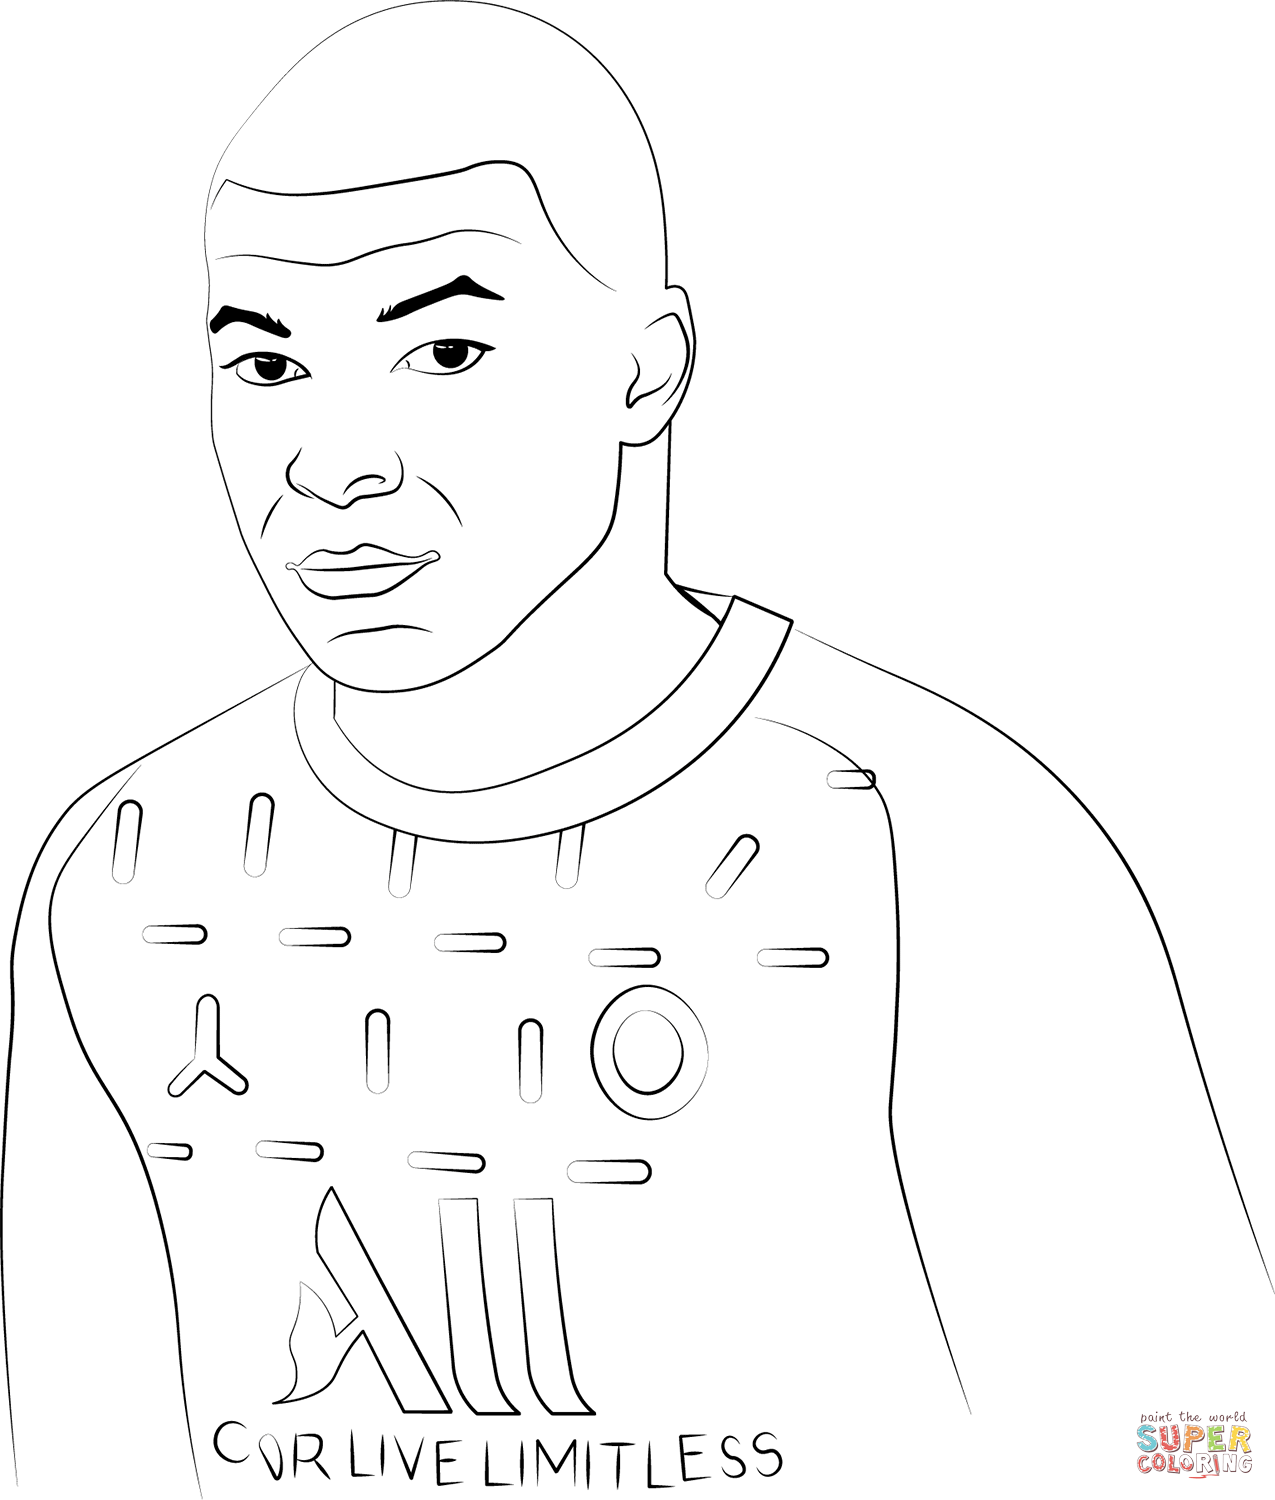 Kylian Mbappe coloring page | Free Printable Coloring Pages